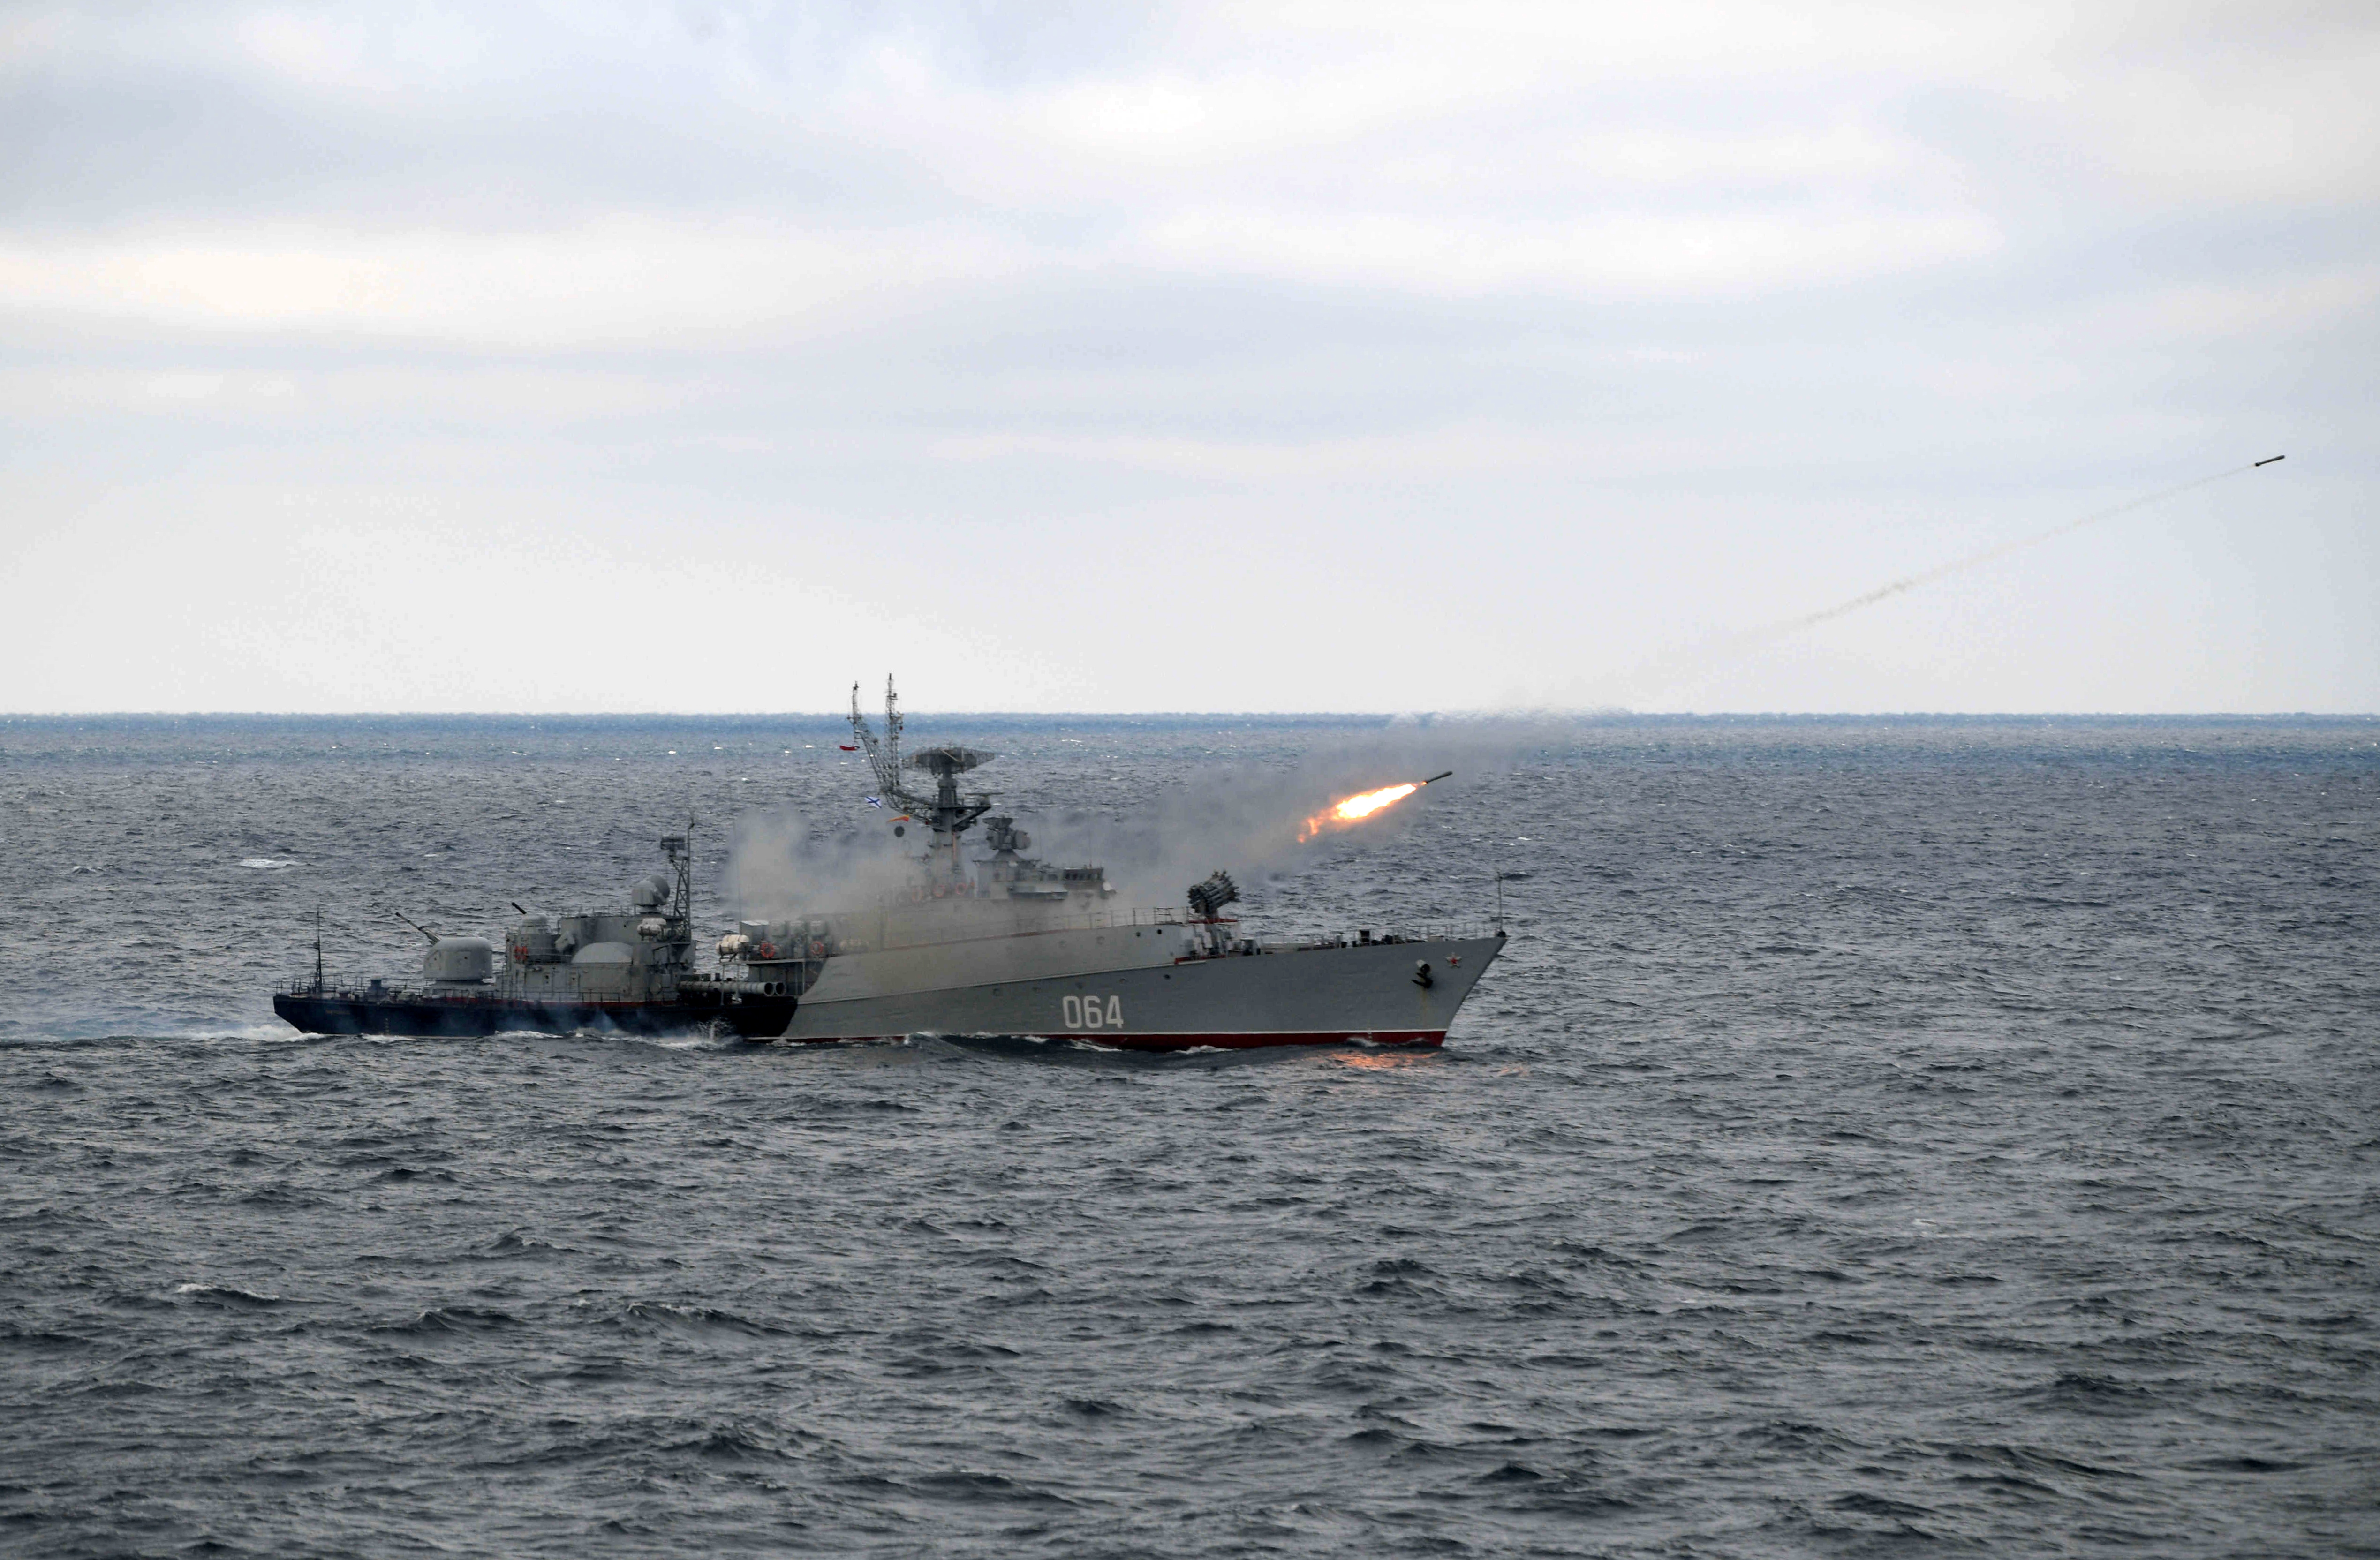 Russian anti-submarine corvette Muromets fires during the joint drills of the Northern and Black Sea fleets, attended by Russian President Vladimir Putin, in the Black Sea, off the coast of Crimea